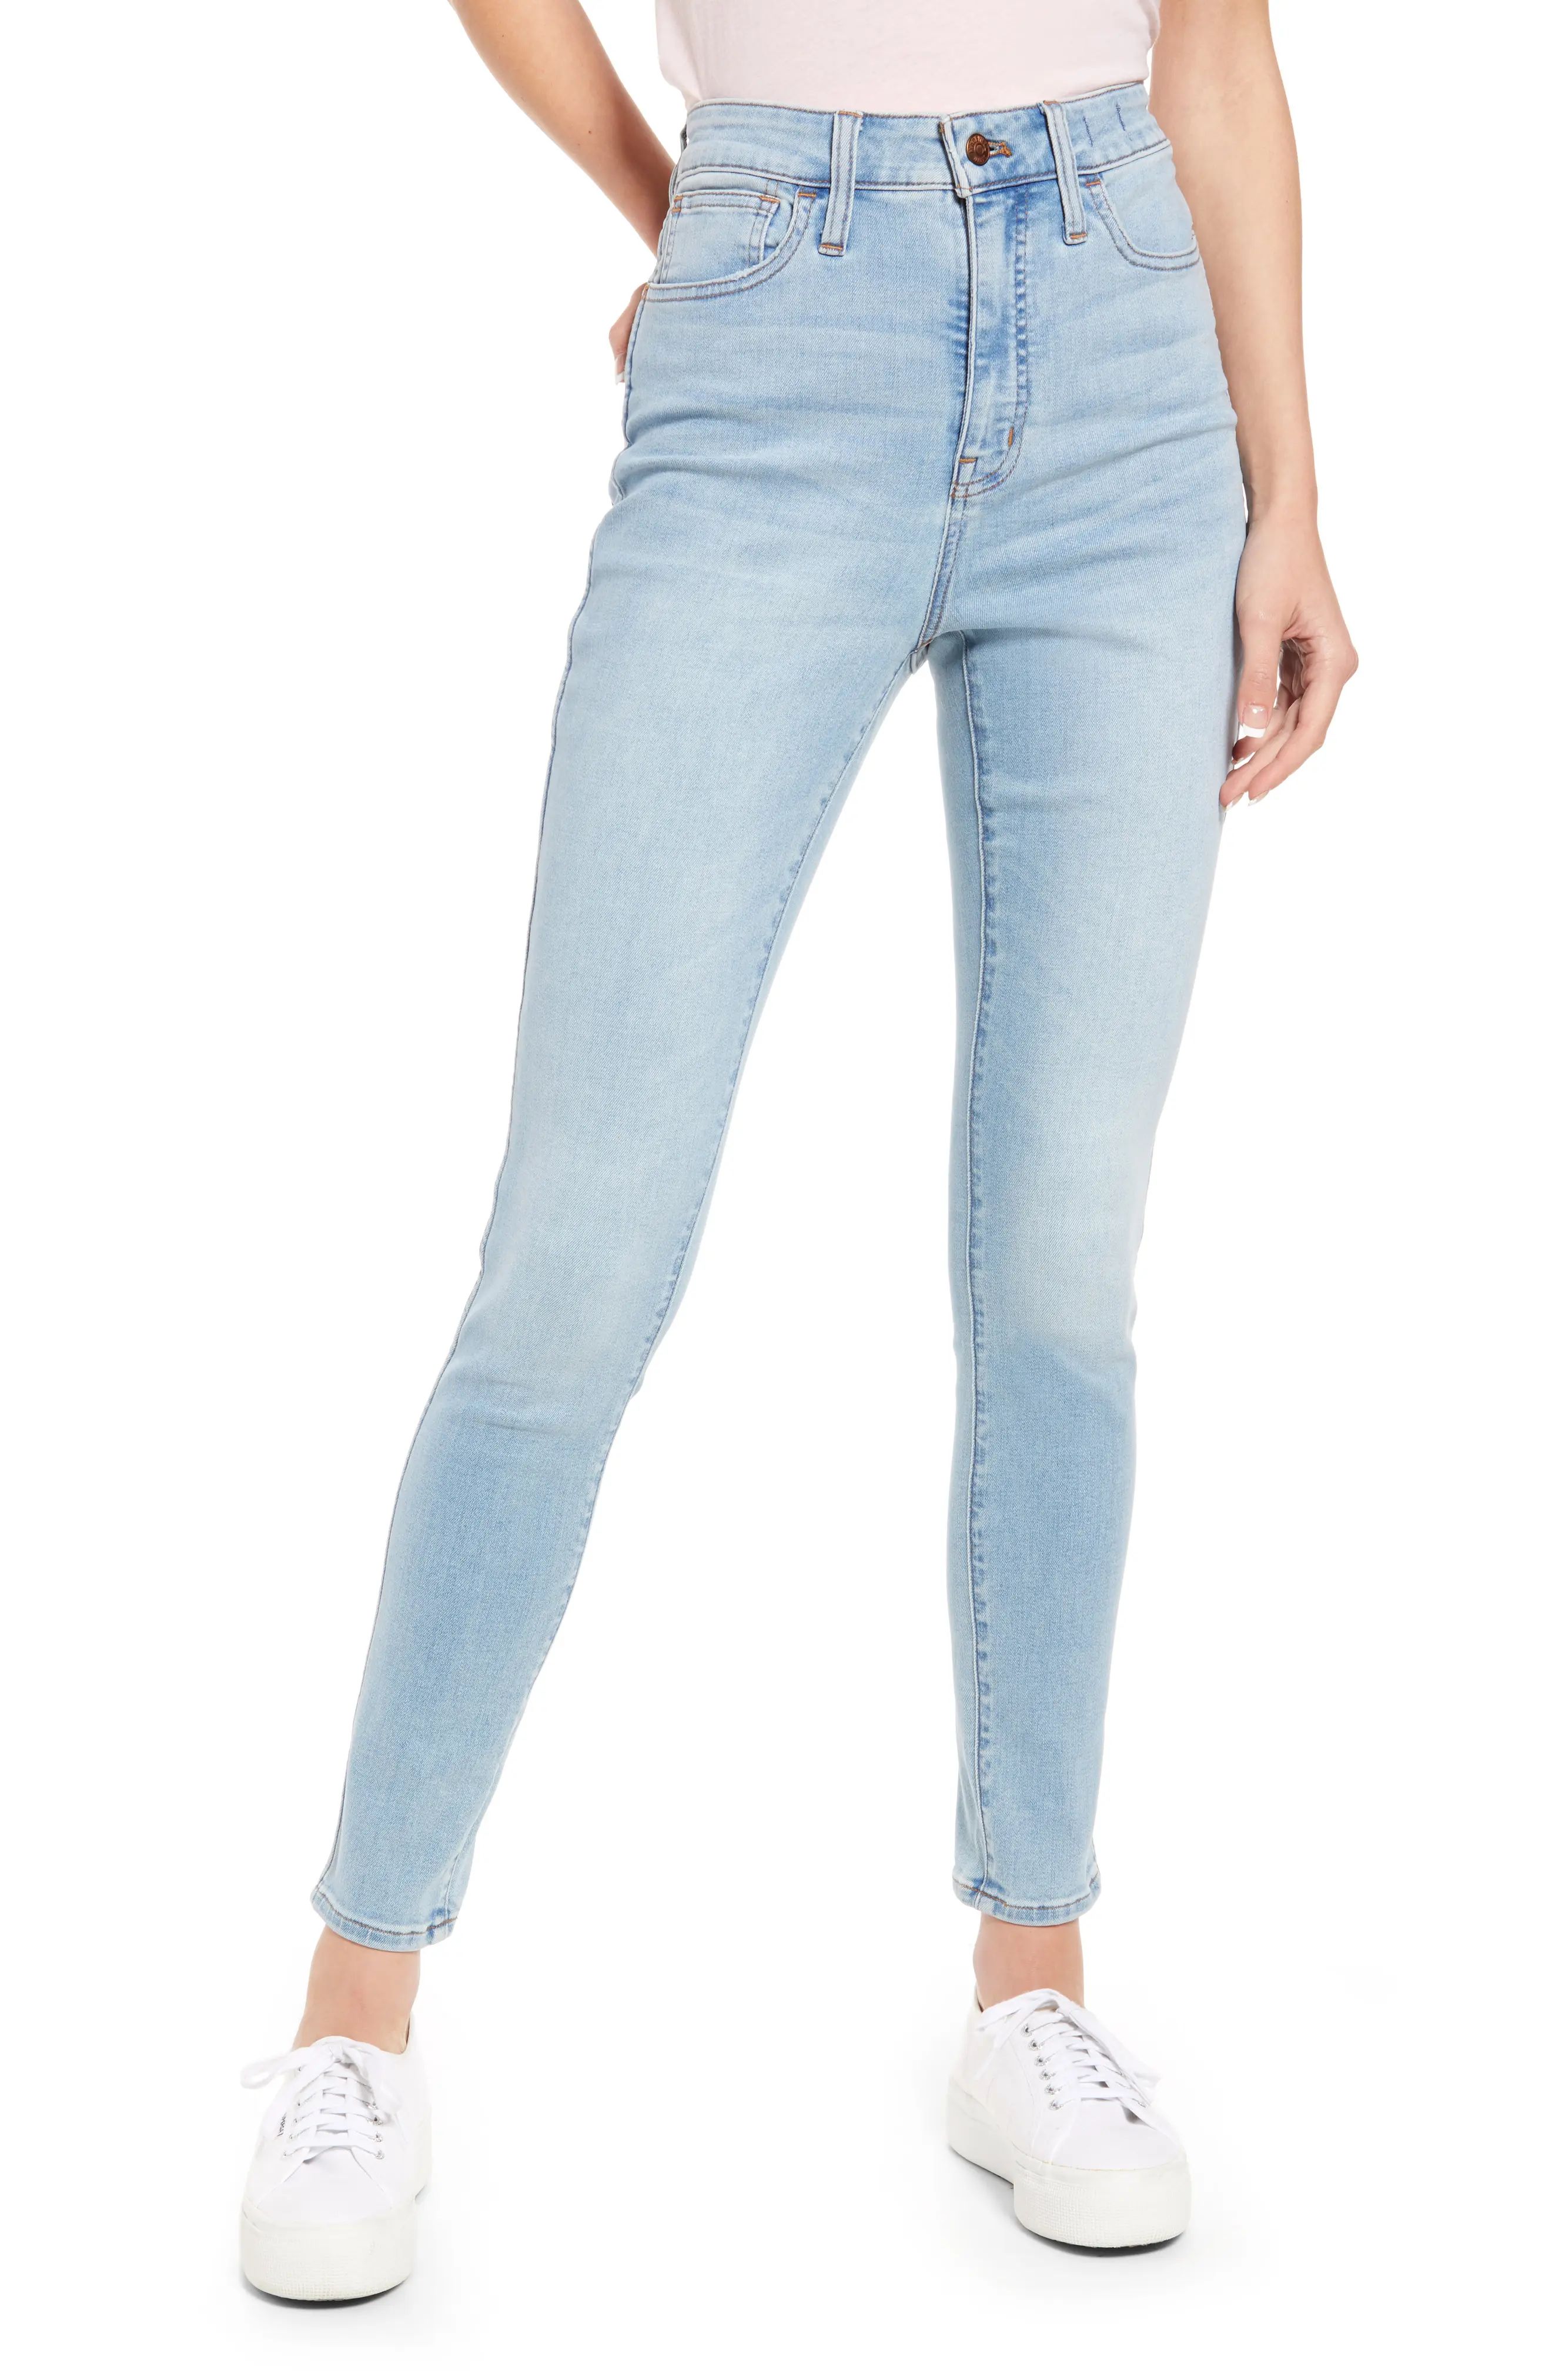 Madewell Roadtripper Curvy Skinny Jeans, Size 25 Tall in Cadwell Wash at Nordstrom | Nordstrom